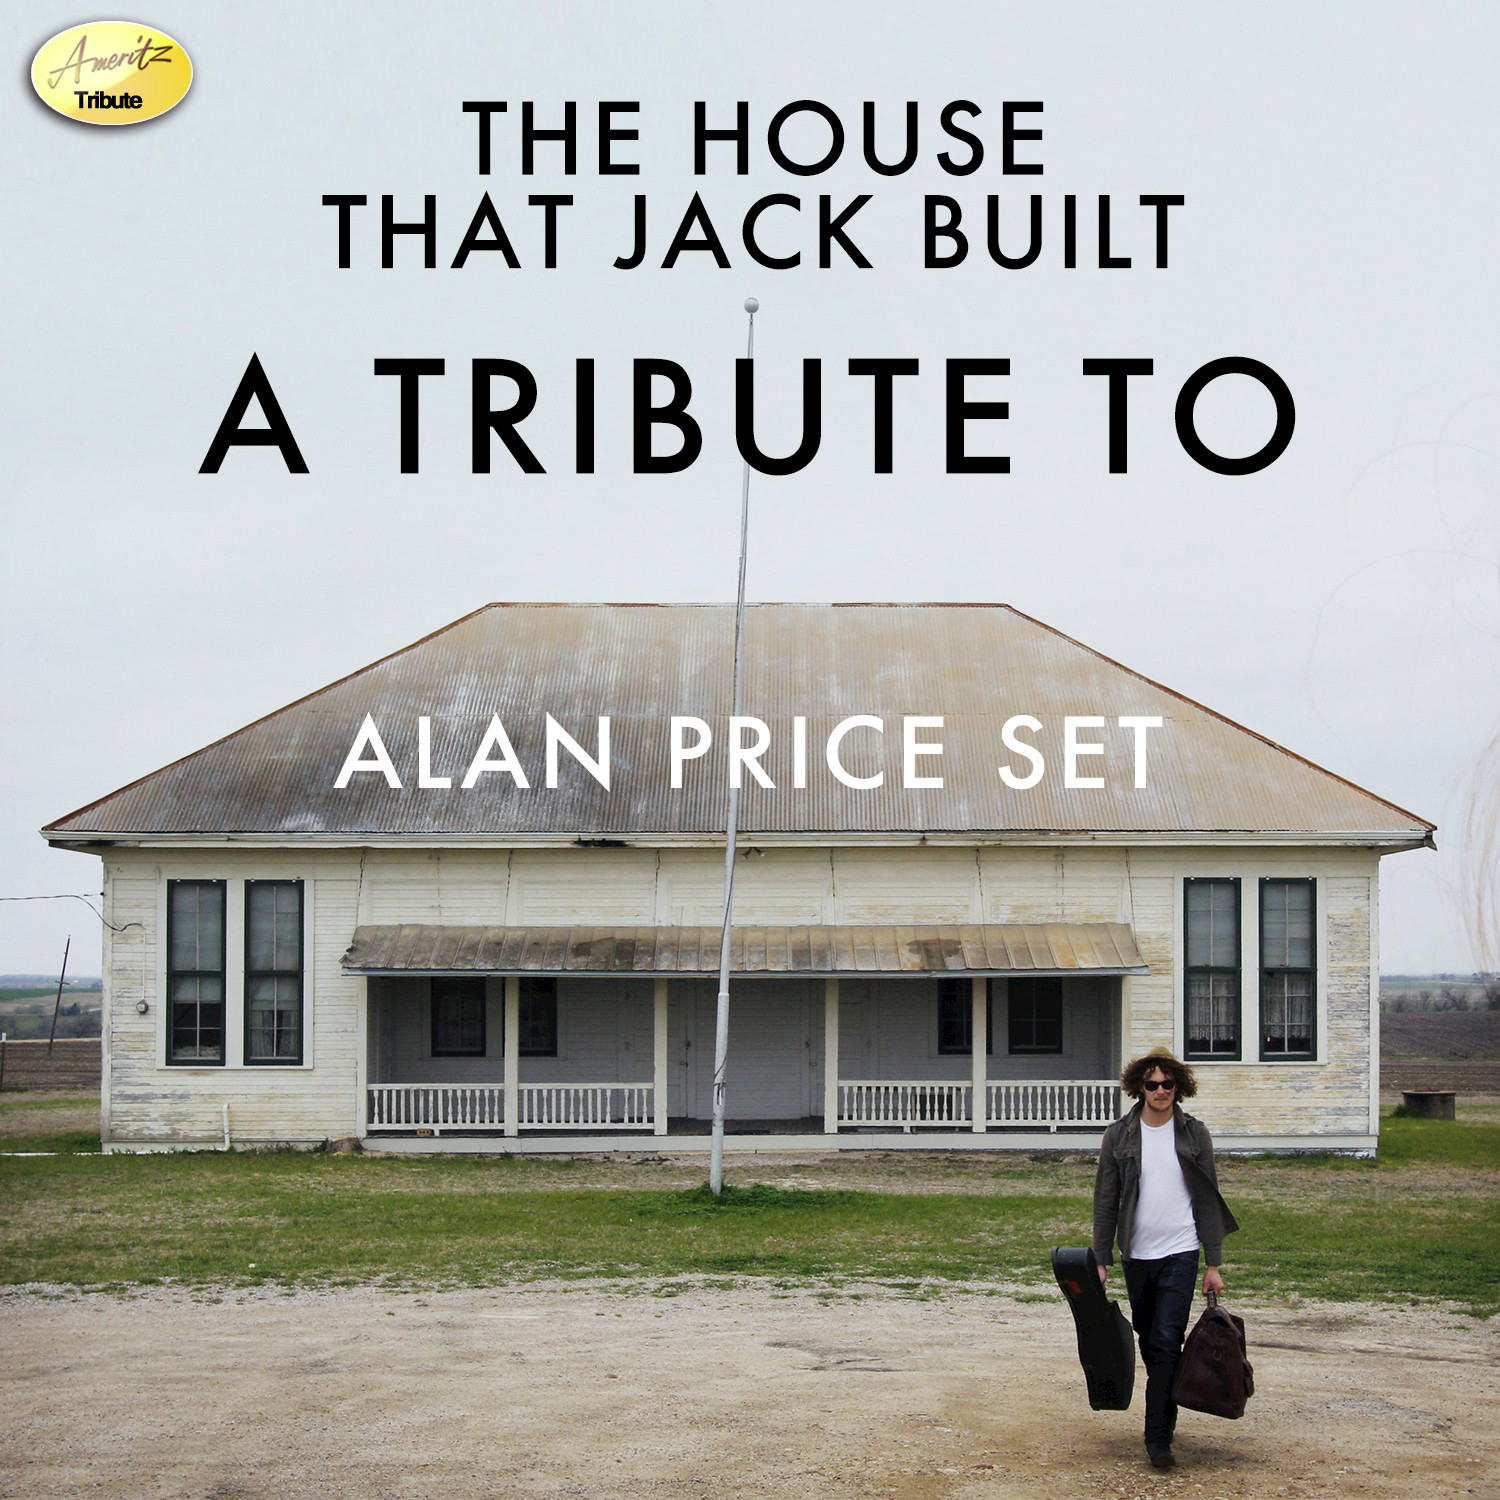 The House That Jack Built - A Tribute to Alan Price Set